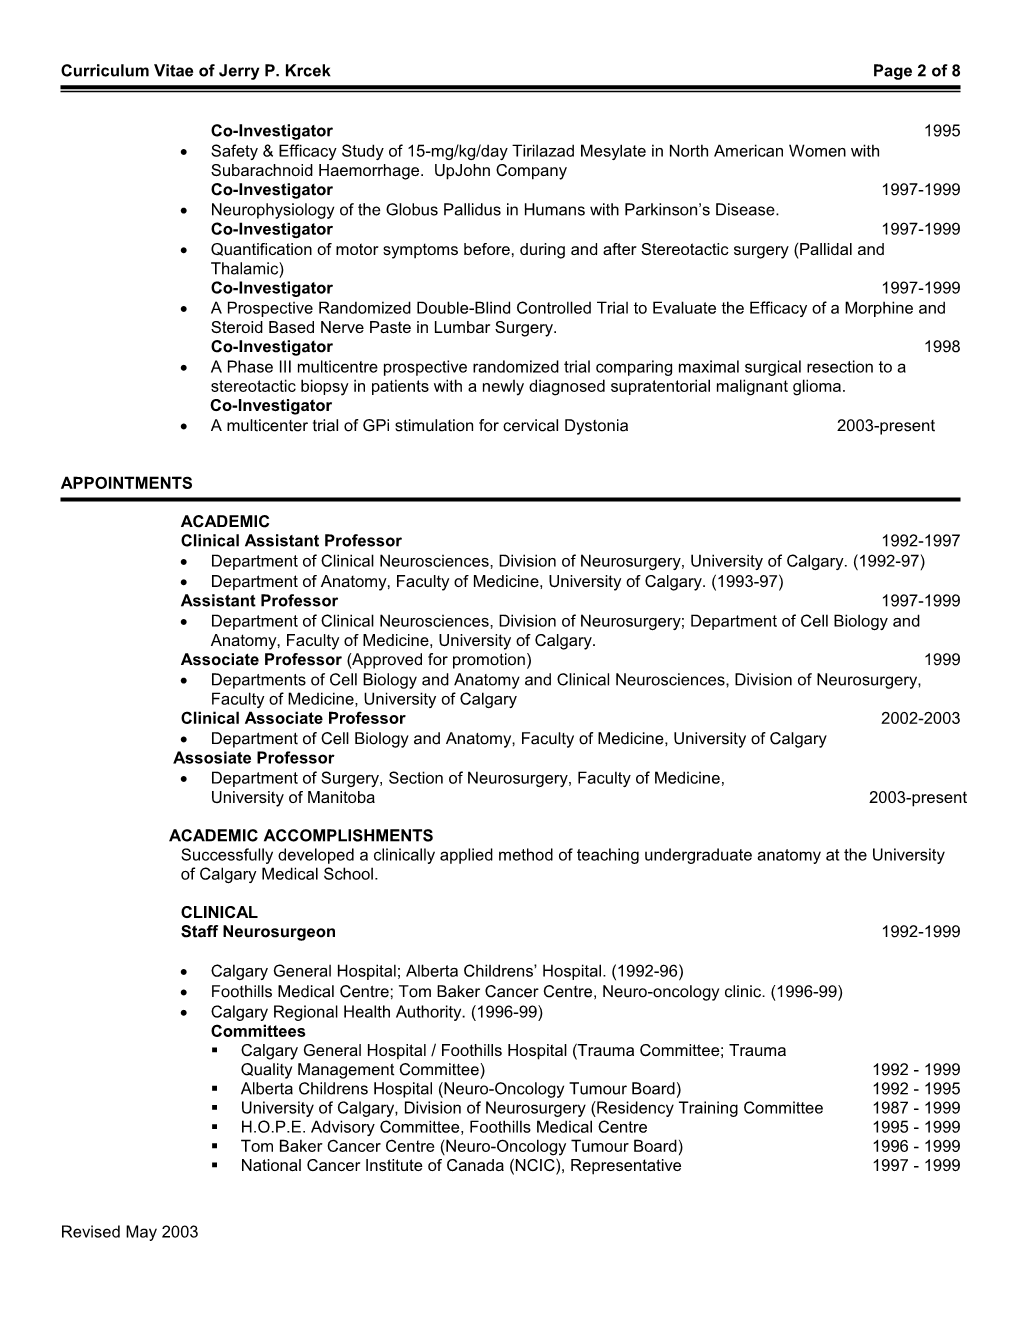 Curriculum Vitae of Jerry P. Krcek Page 8 of 8